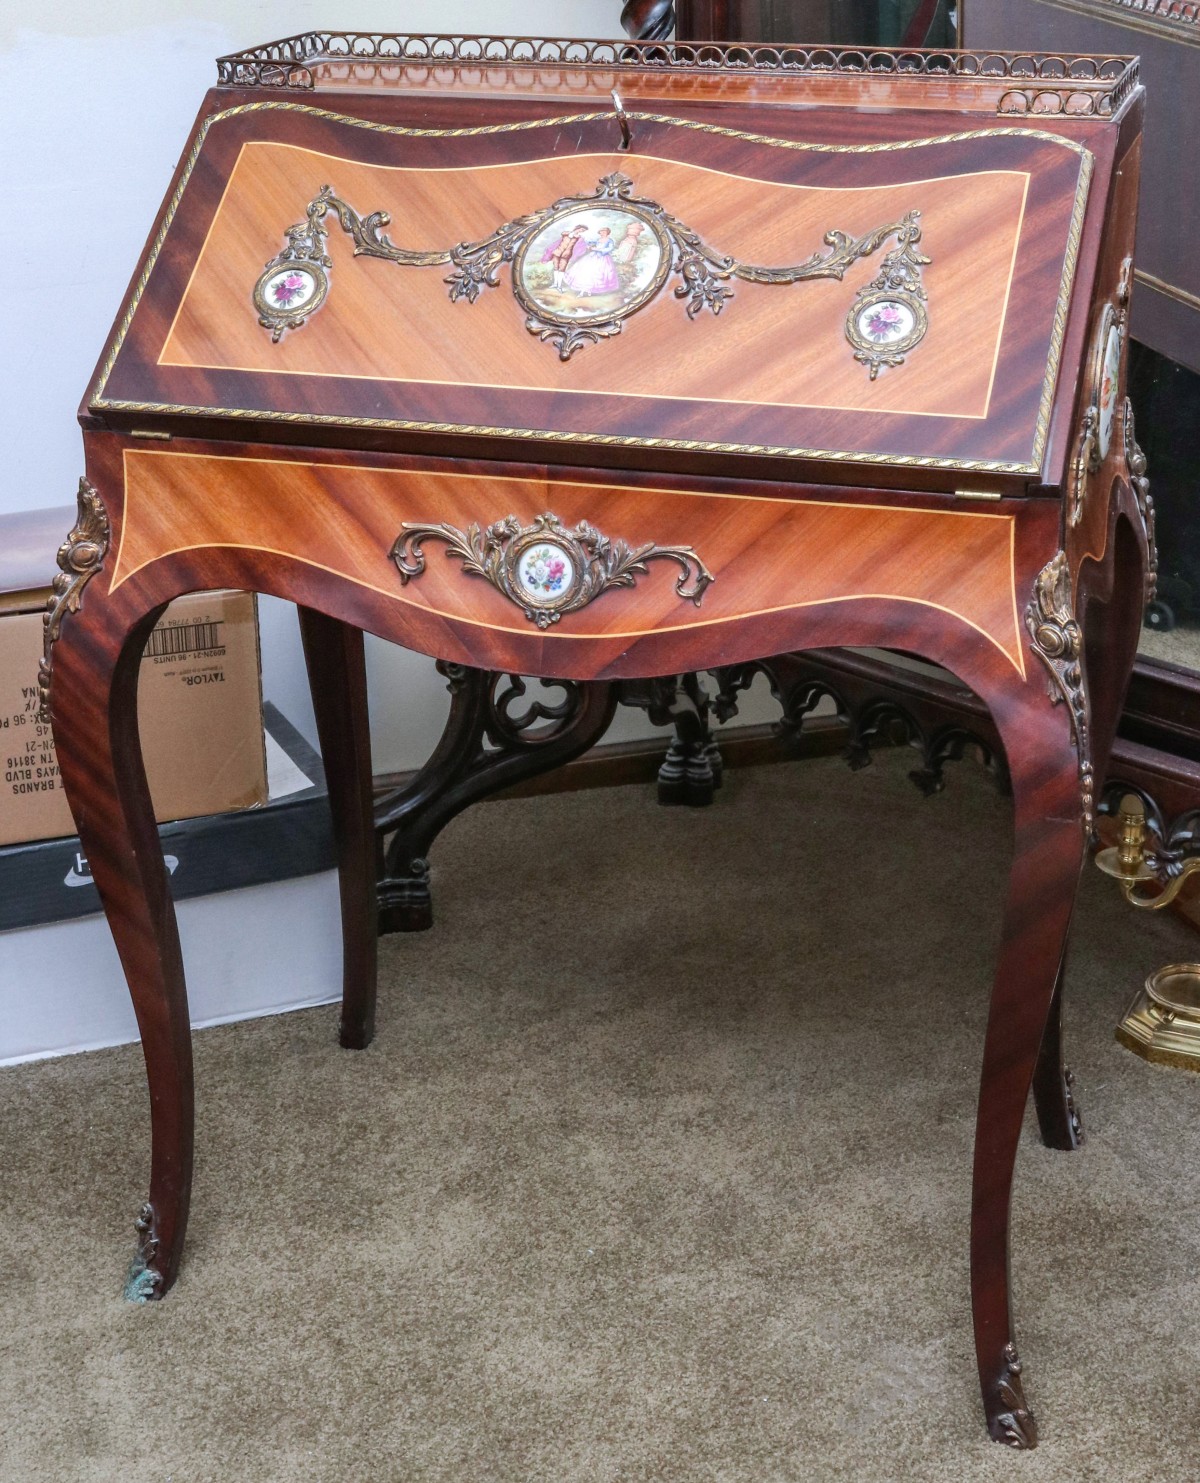 A LATE 20TH CENTURY FRENCH STYLE DESK WITH PORCELAINS